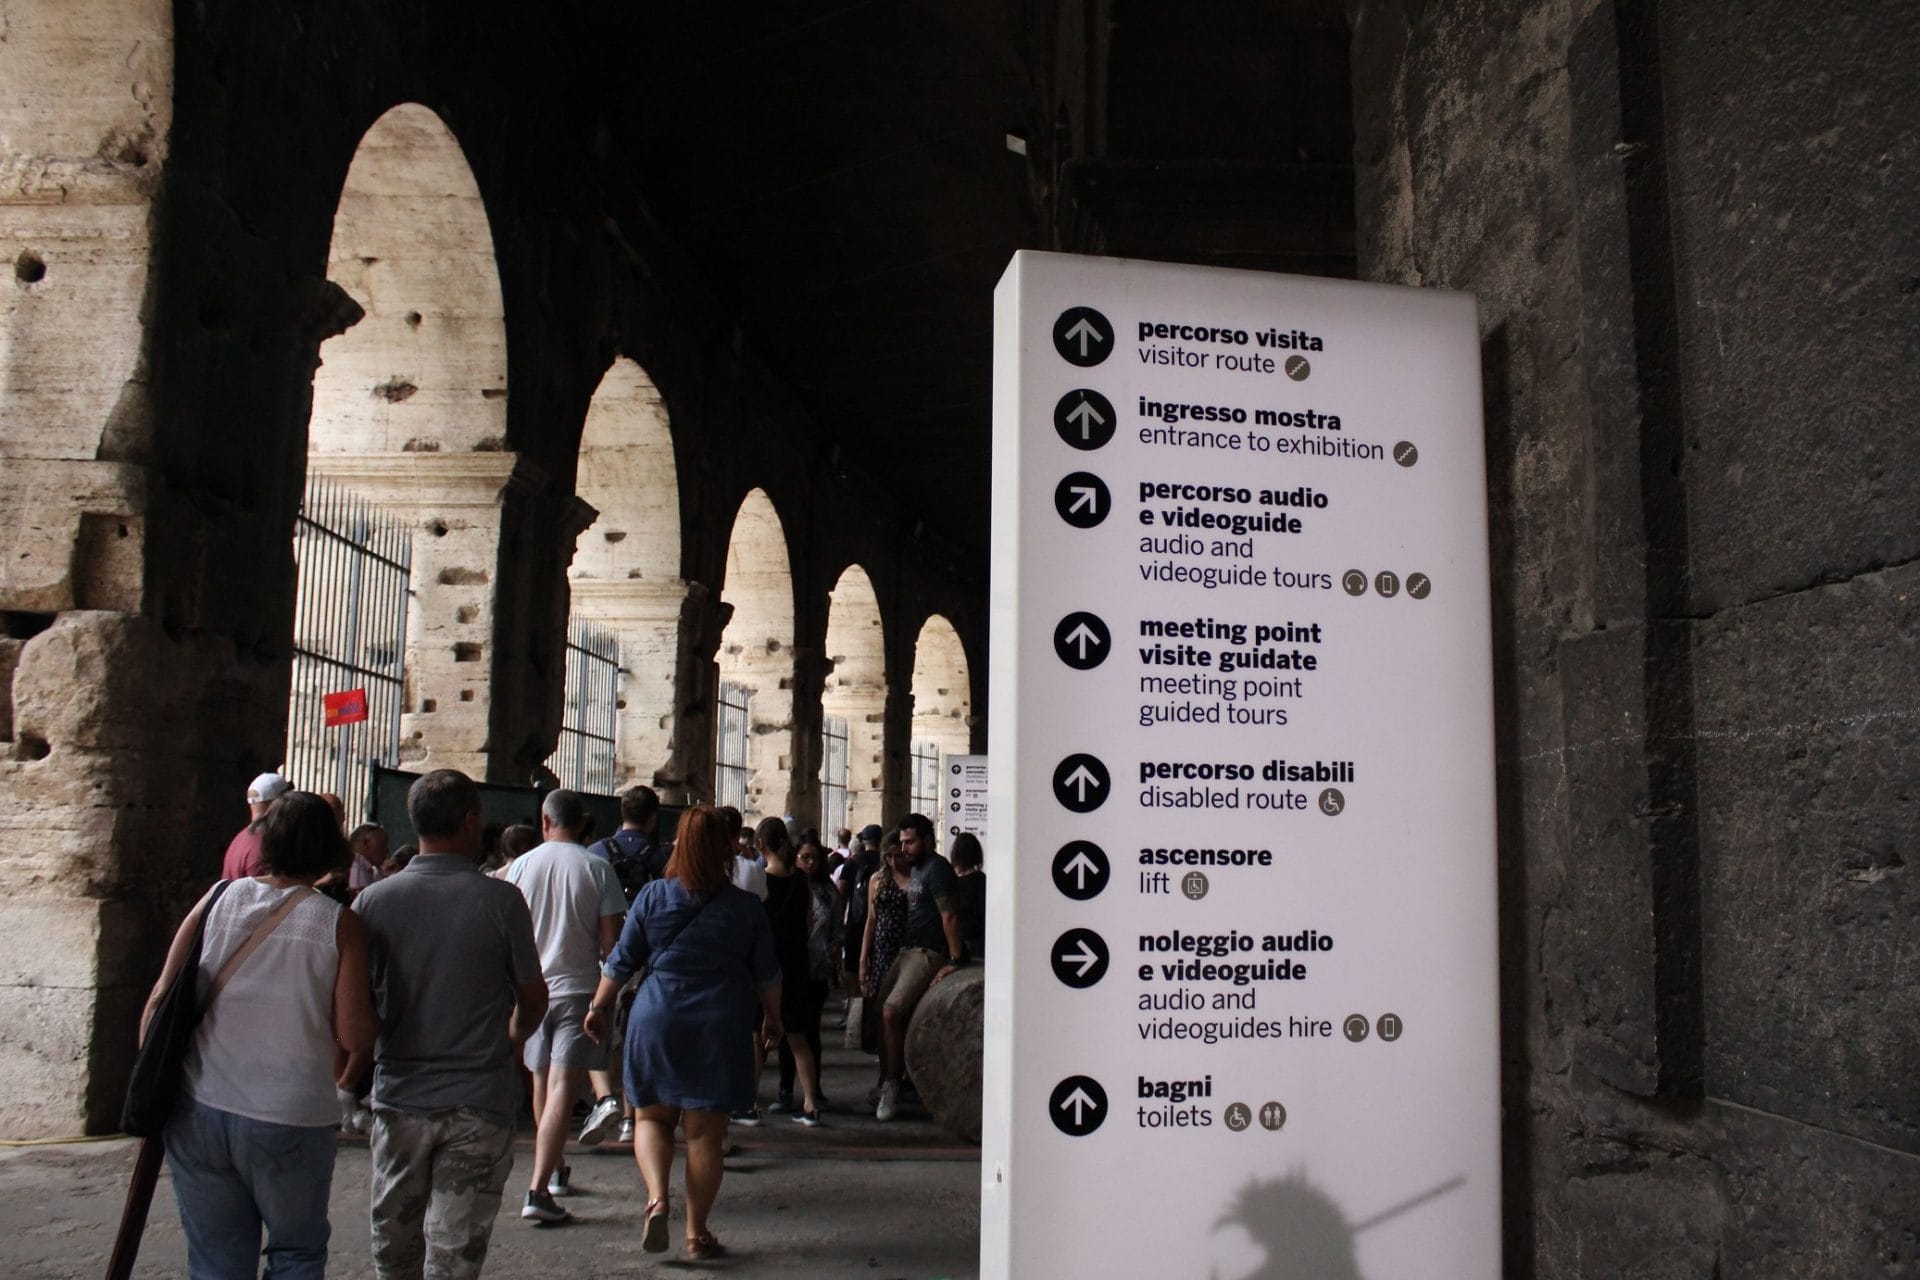 colosseum tickets skip the line Infos accessibilty restrooms